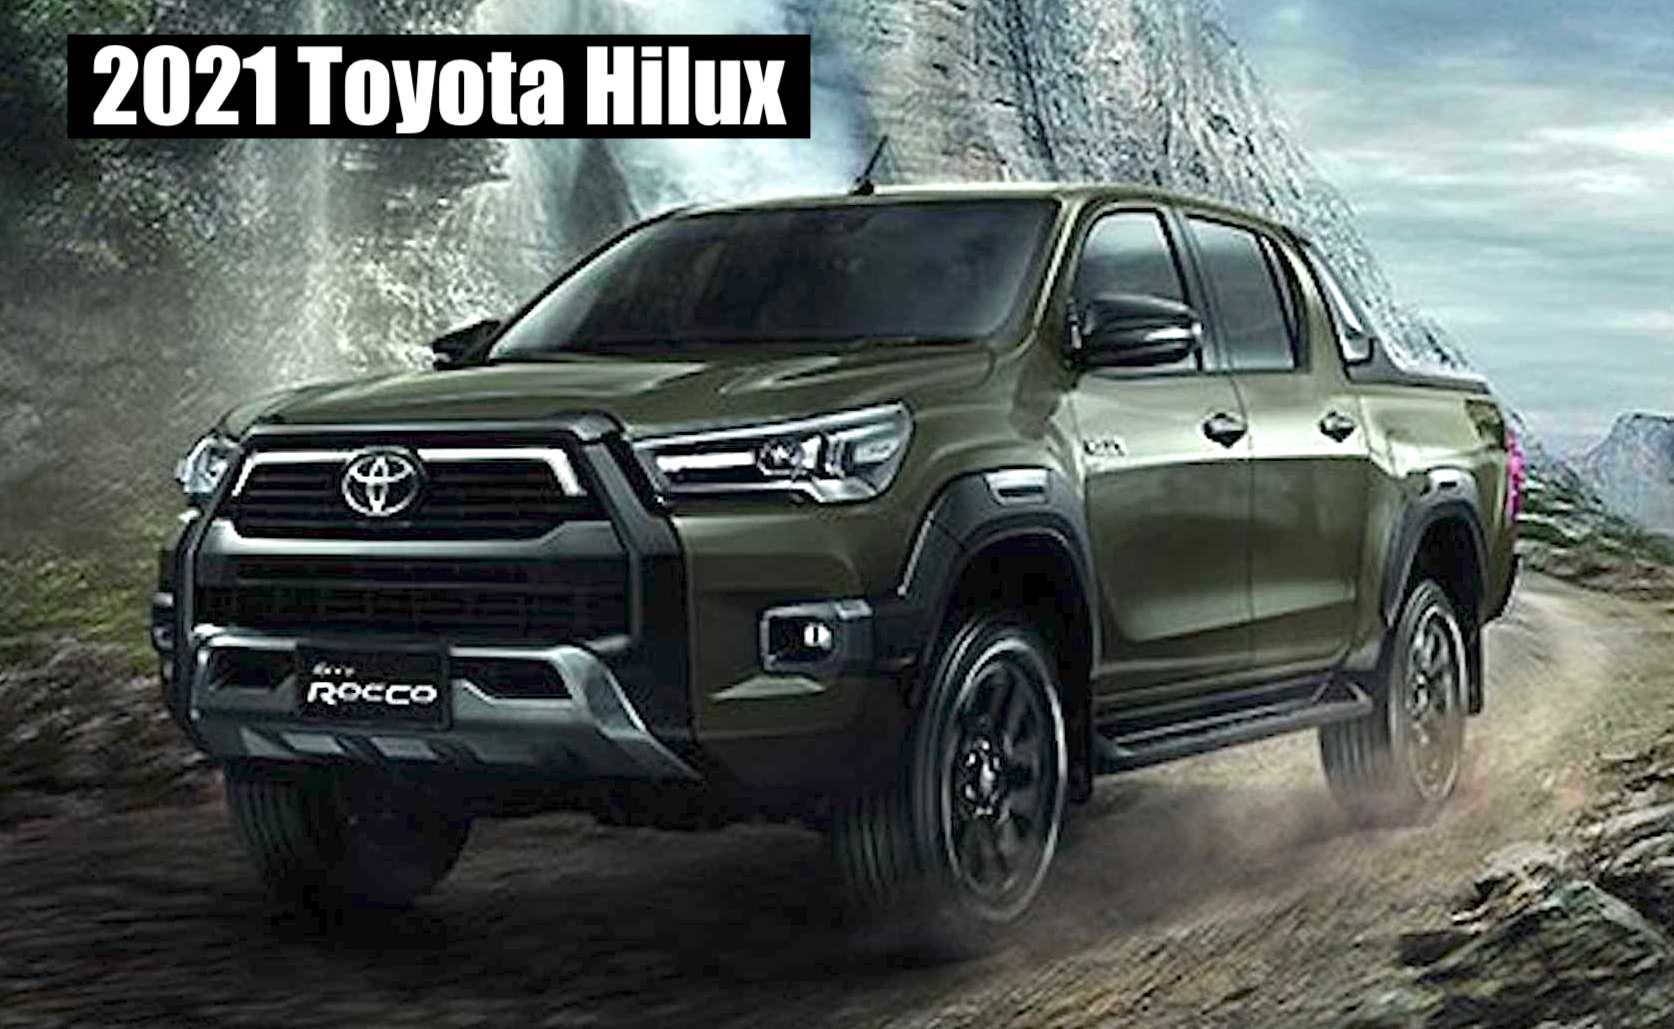 Refreshed 2021 Toyota Hilux Makes Its World Debut! Does It ...